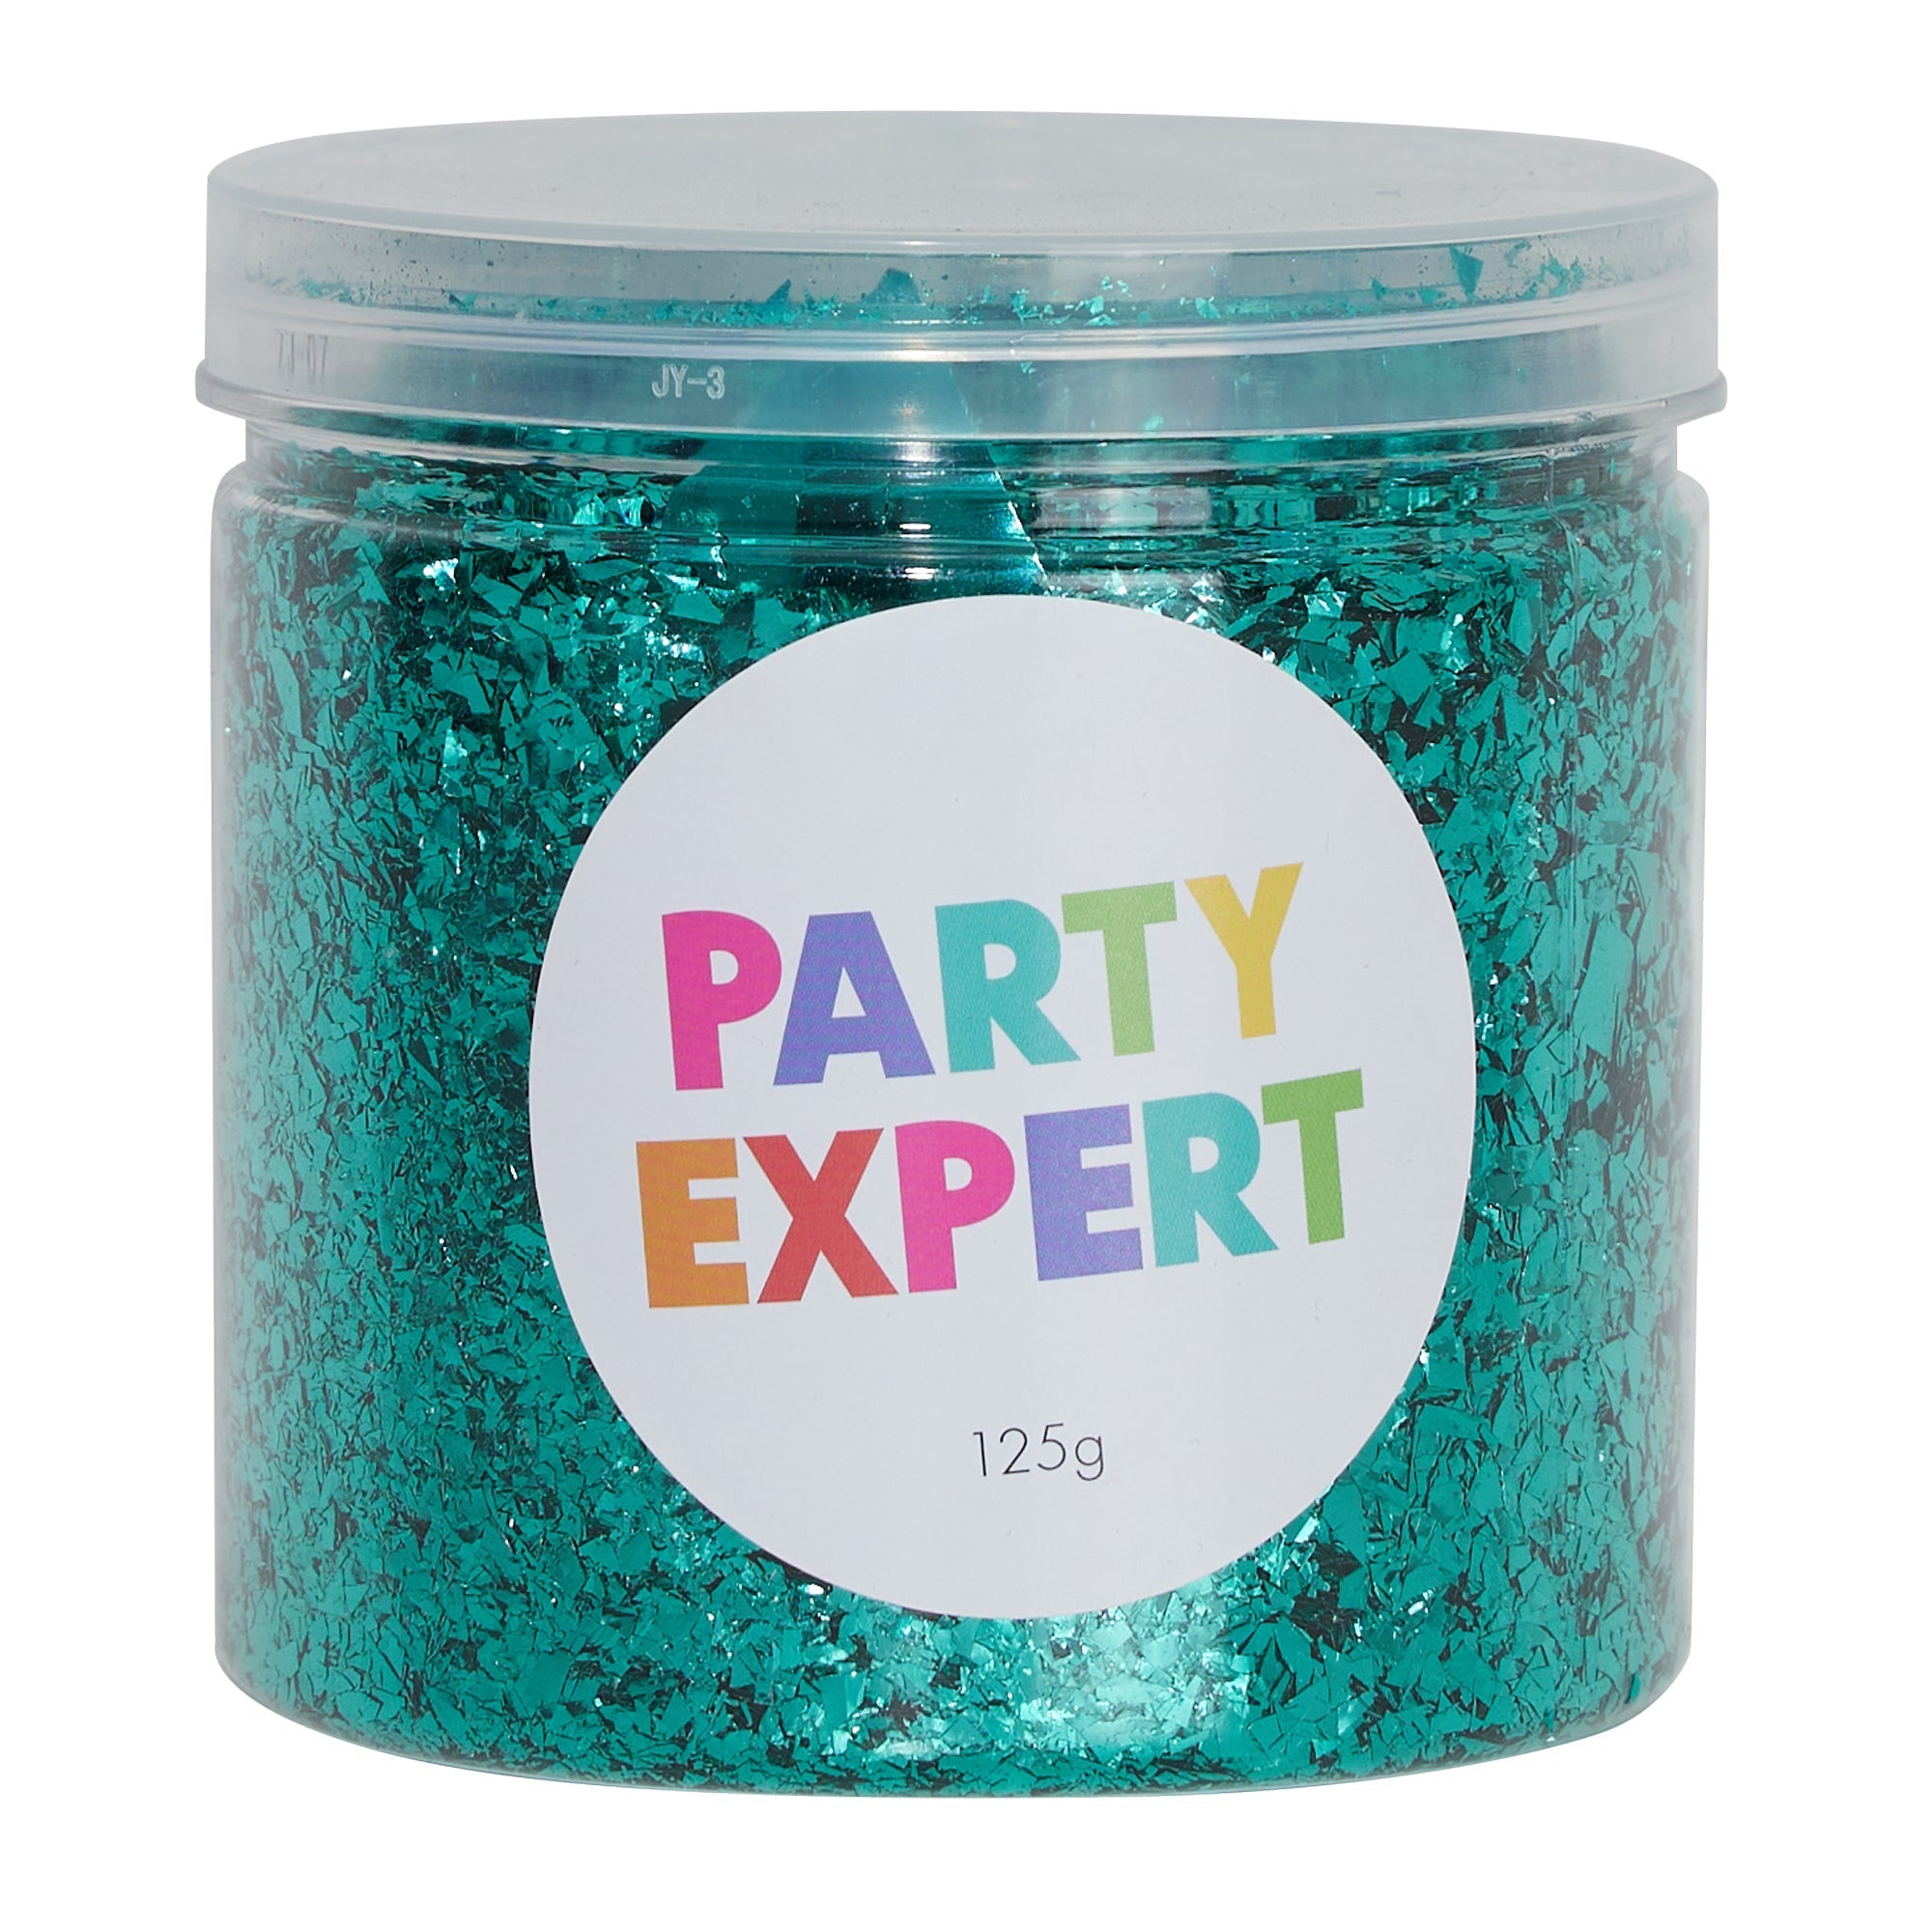 Shredded Turquoise Confetti, 1 Count